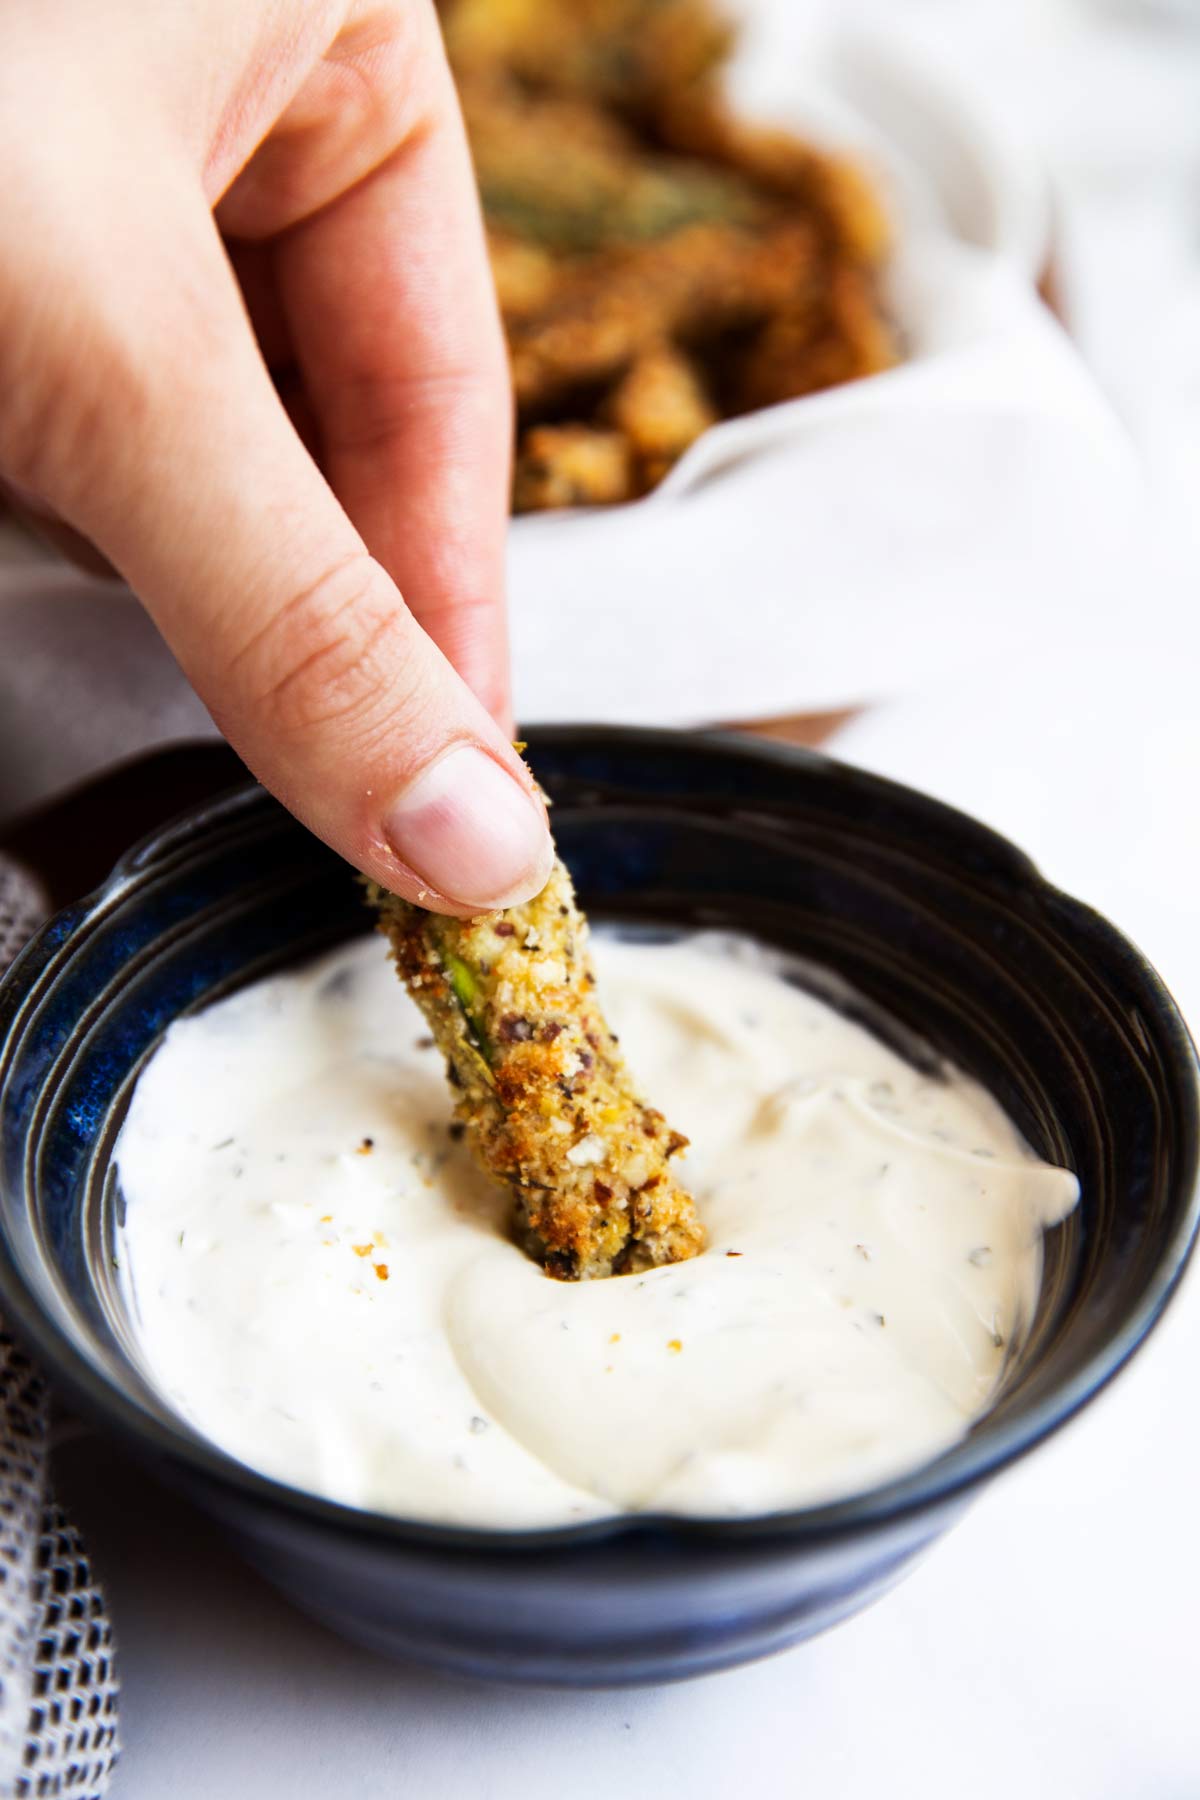 dipping a healthy zucchini fry into sour cream dip